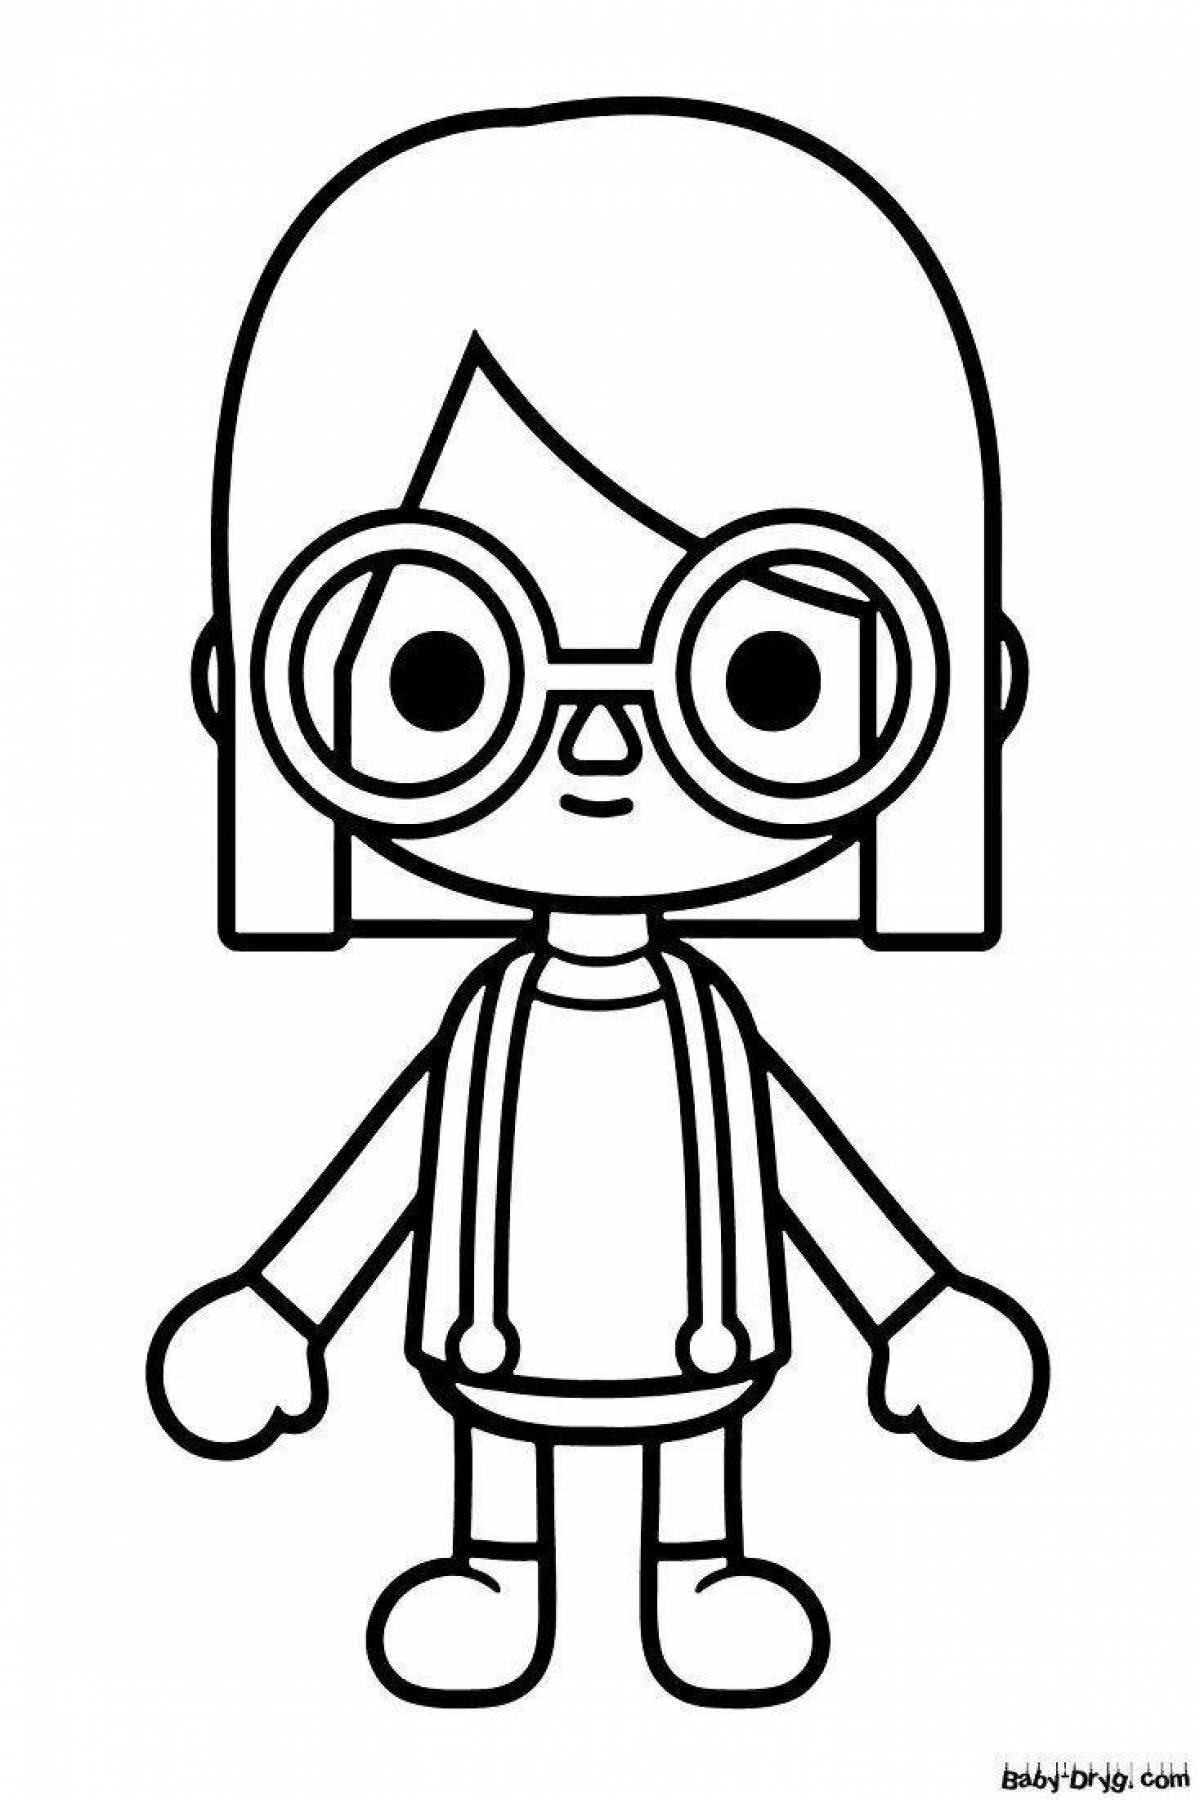 Toca world shiny coloring page